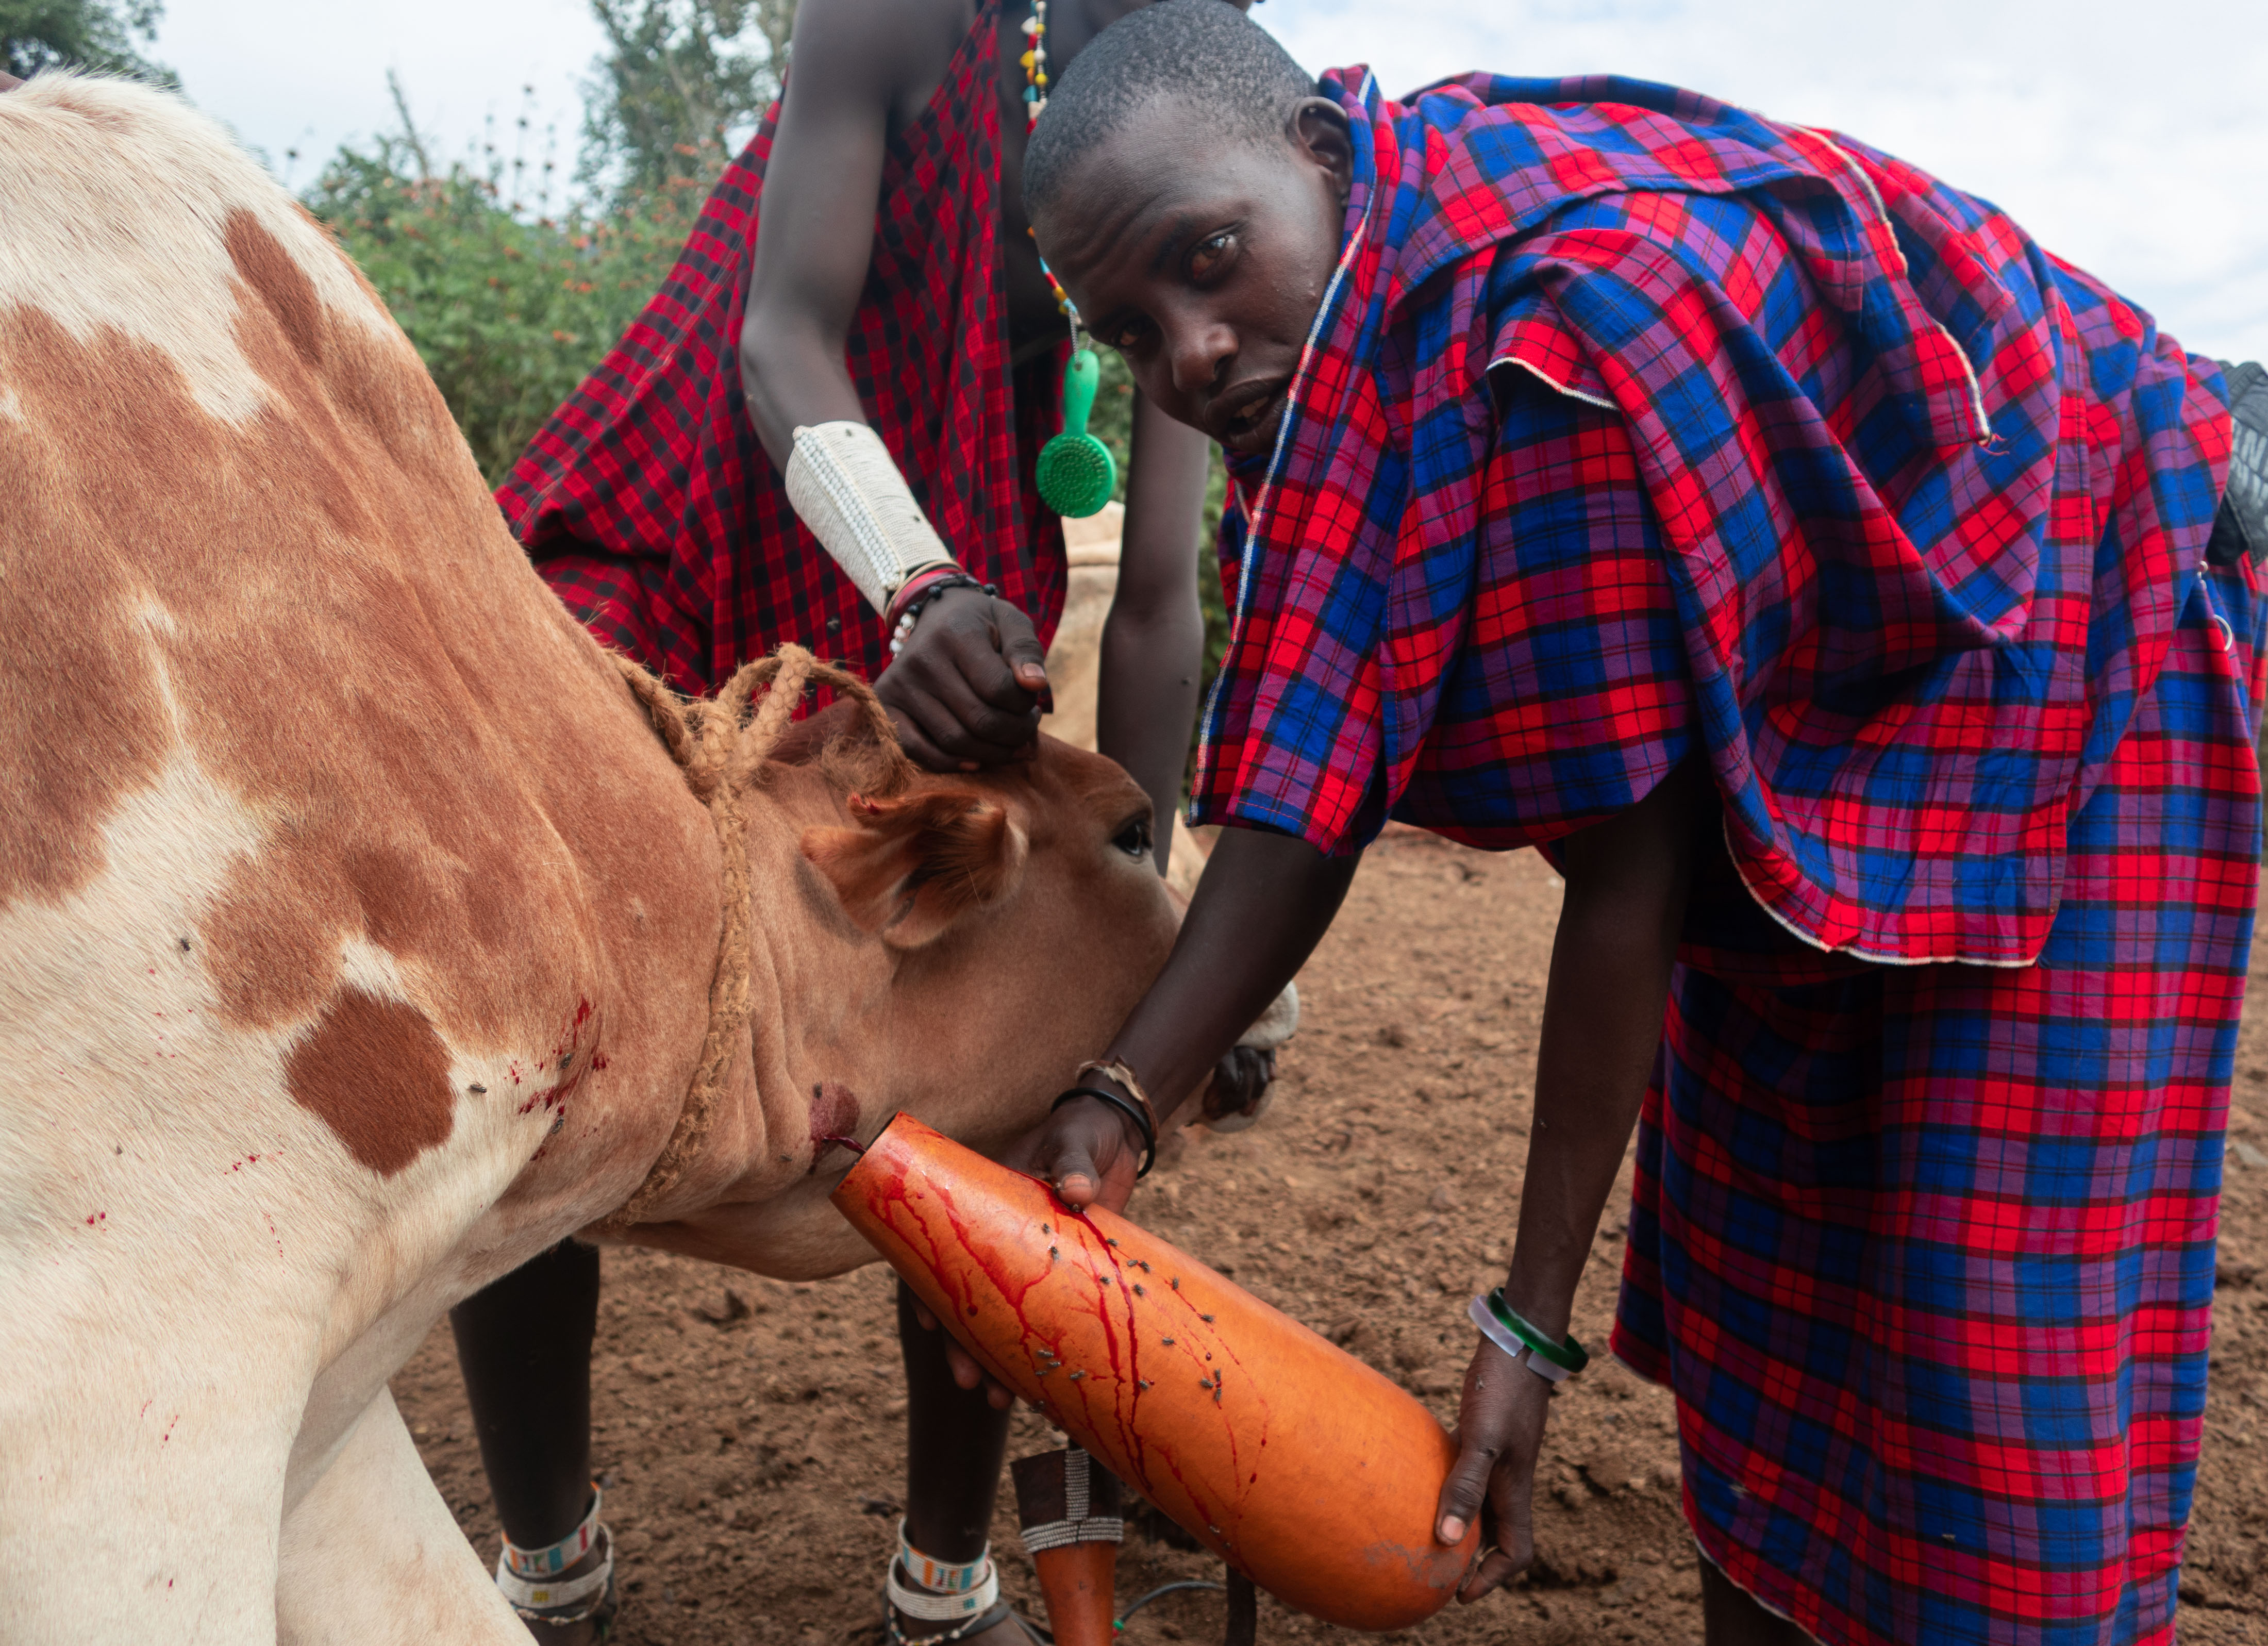 Cows: The Masai have a sacred relationship with cows, they are a source of wealth, milk, and blood. Cow blood provides protein, calories, and nutrition. They shoot the jugular vein with a bow and arrow in a precise way that does not kill the cow. 